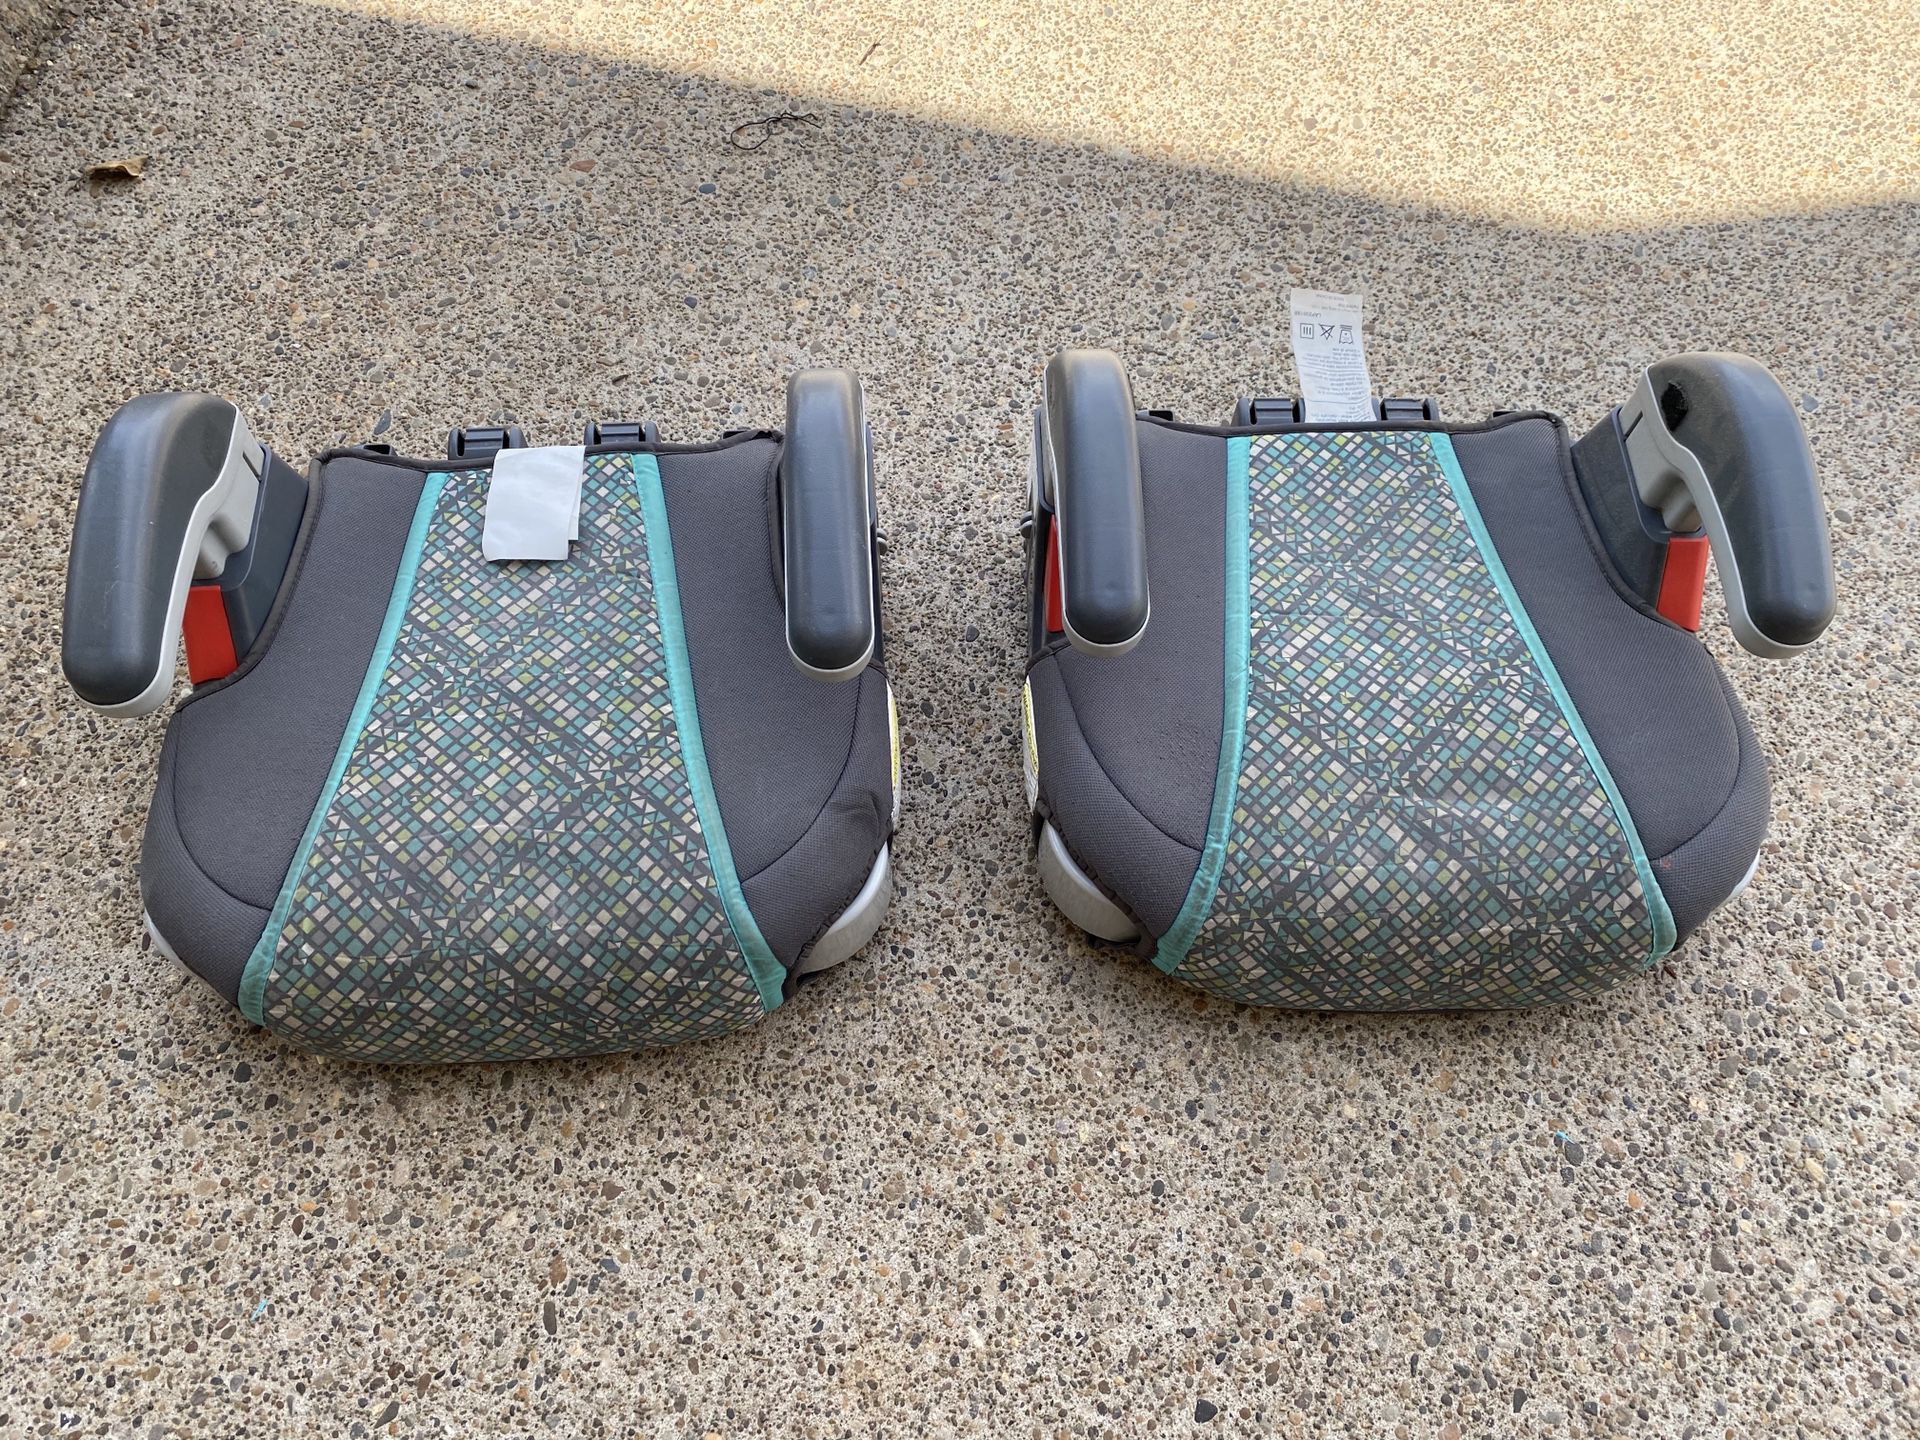 Graco Booster Seats - $10 each